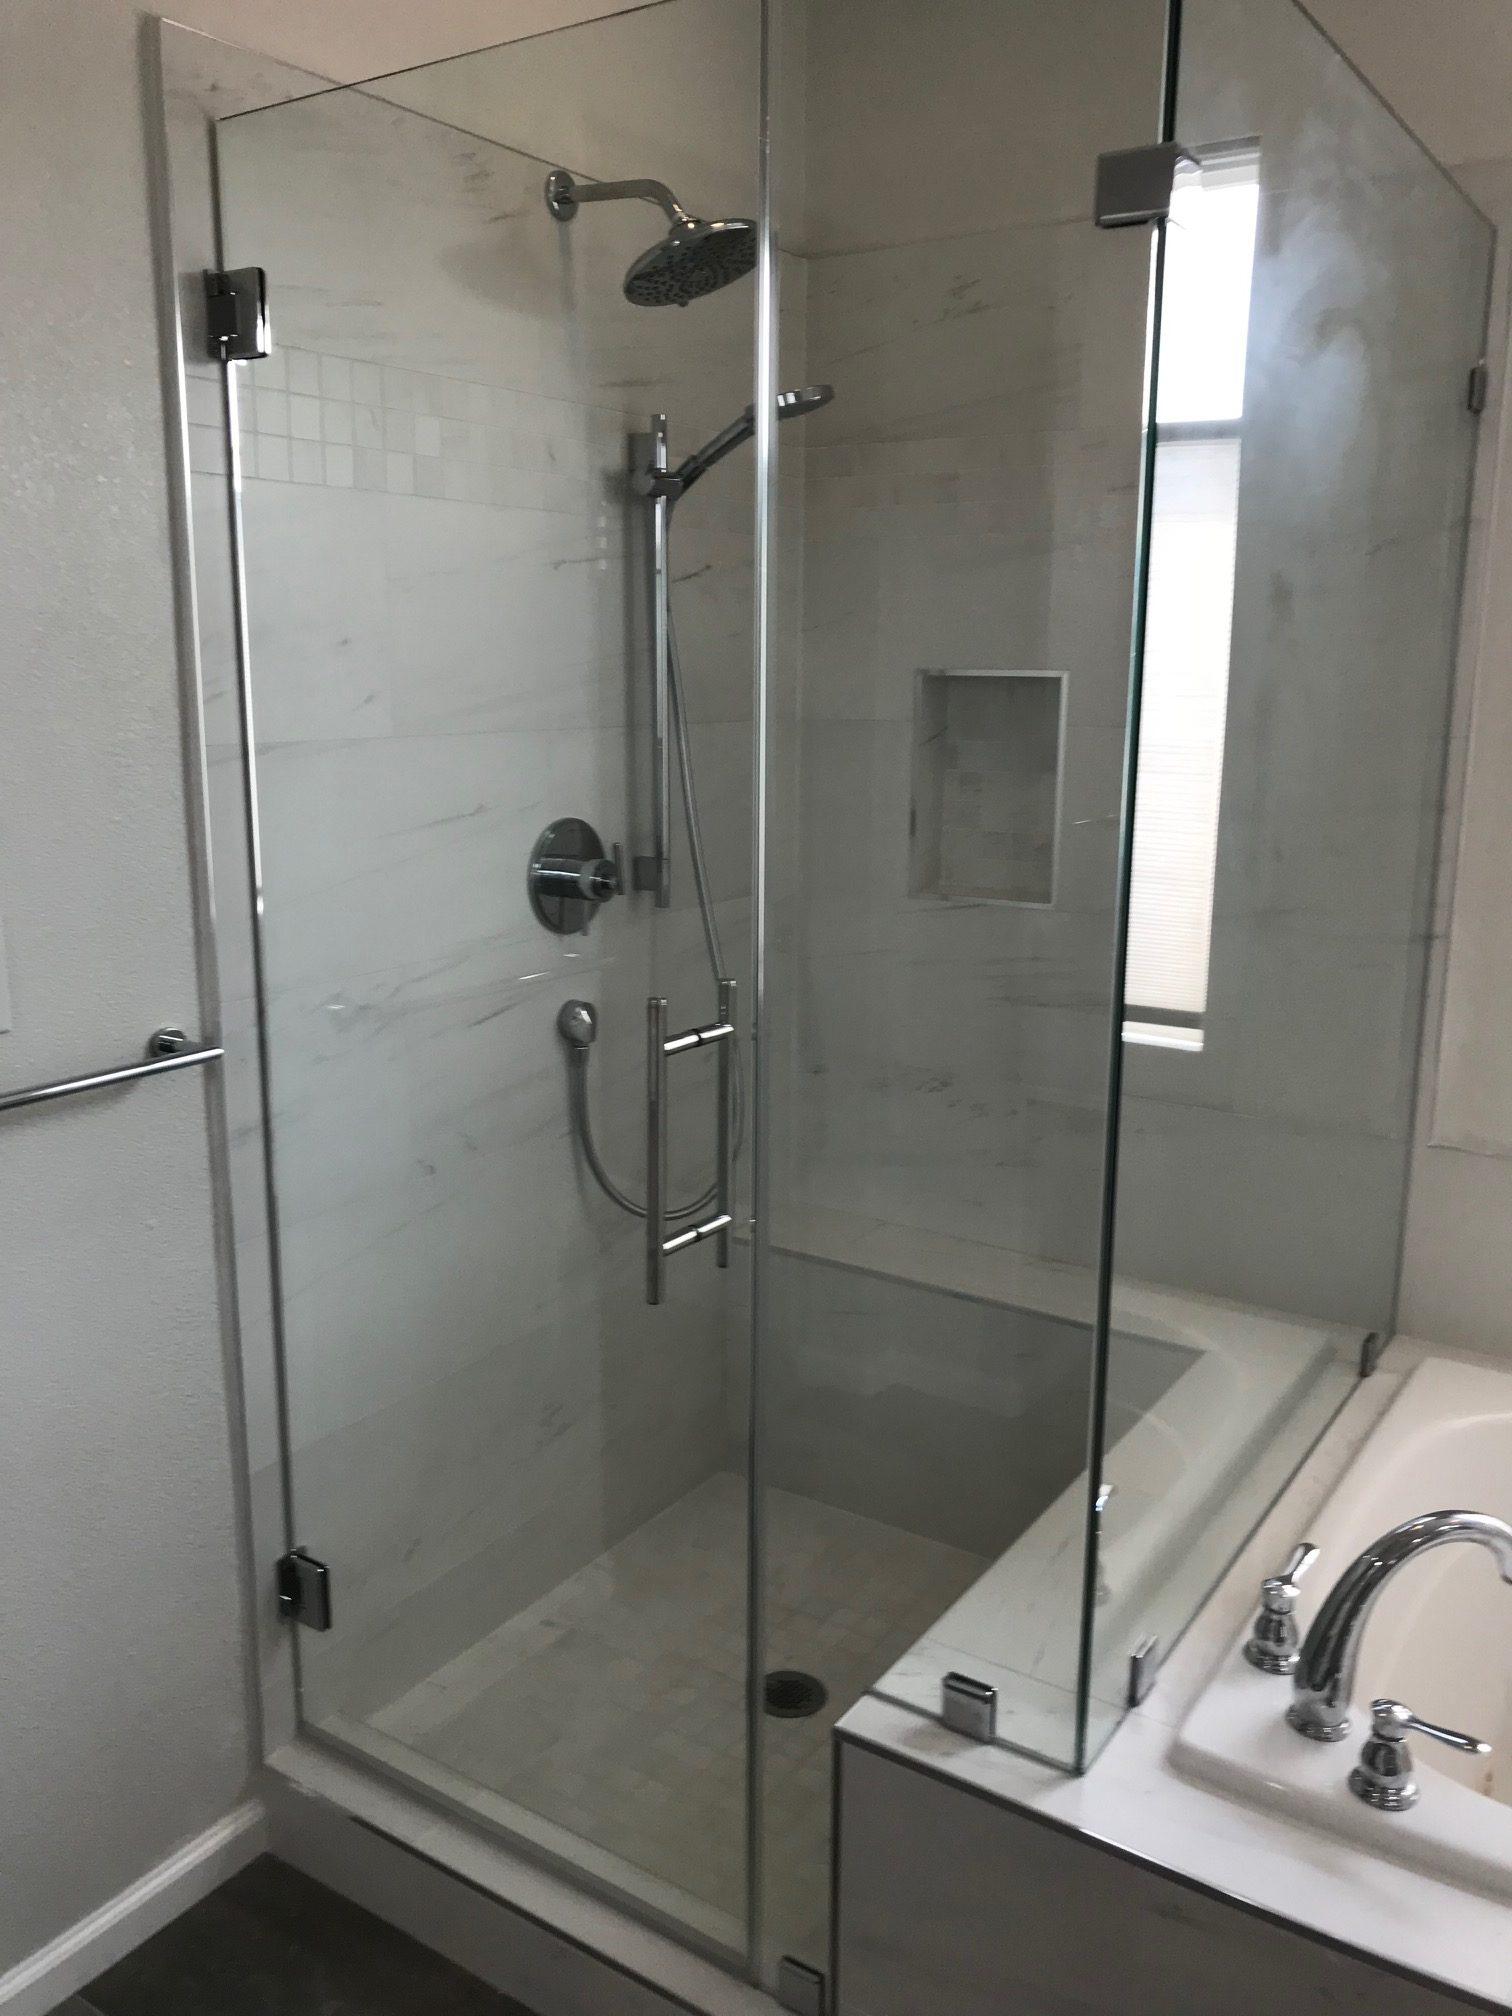 Picture of LW Construction & Handyman Services installed this tile shower which features a frameless glass enclosure and Grohe water fixtures. - LW Construction & Handyman Services